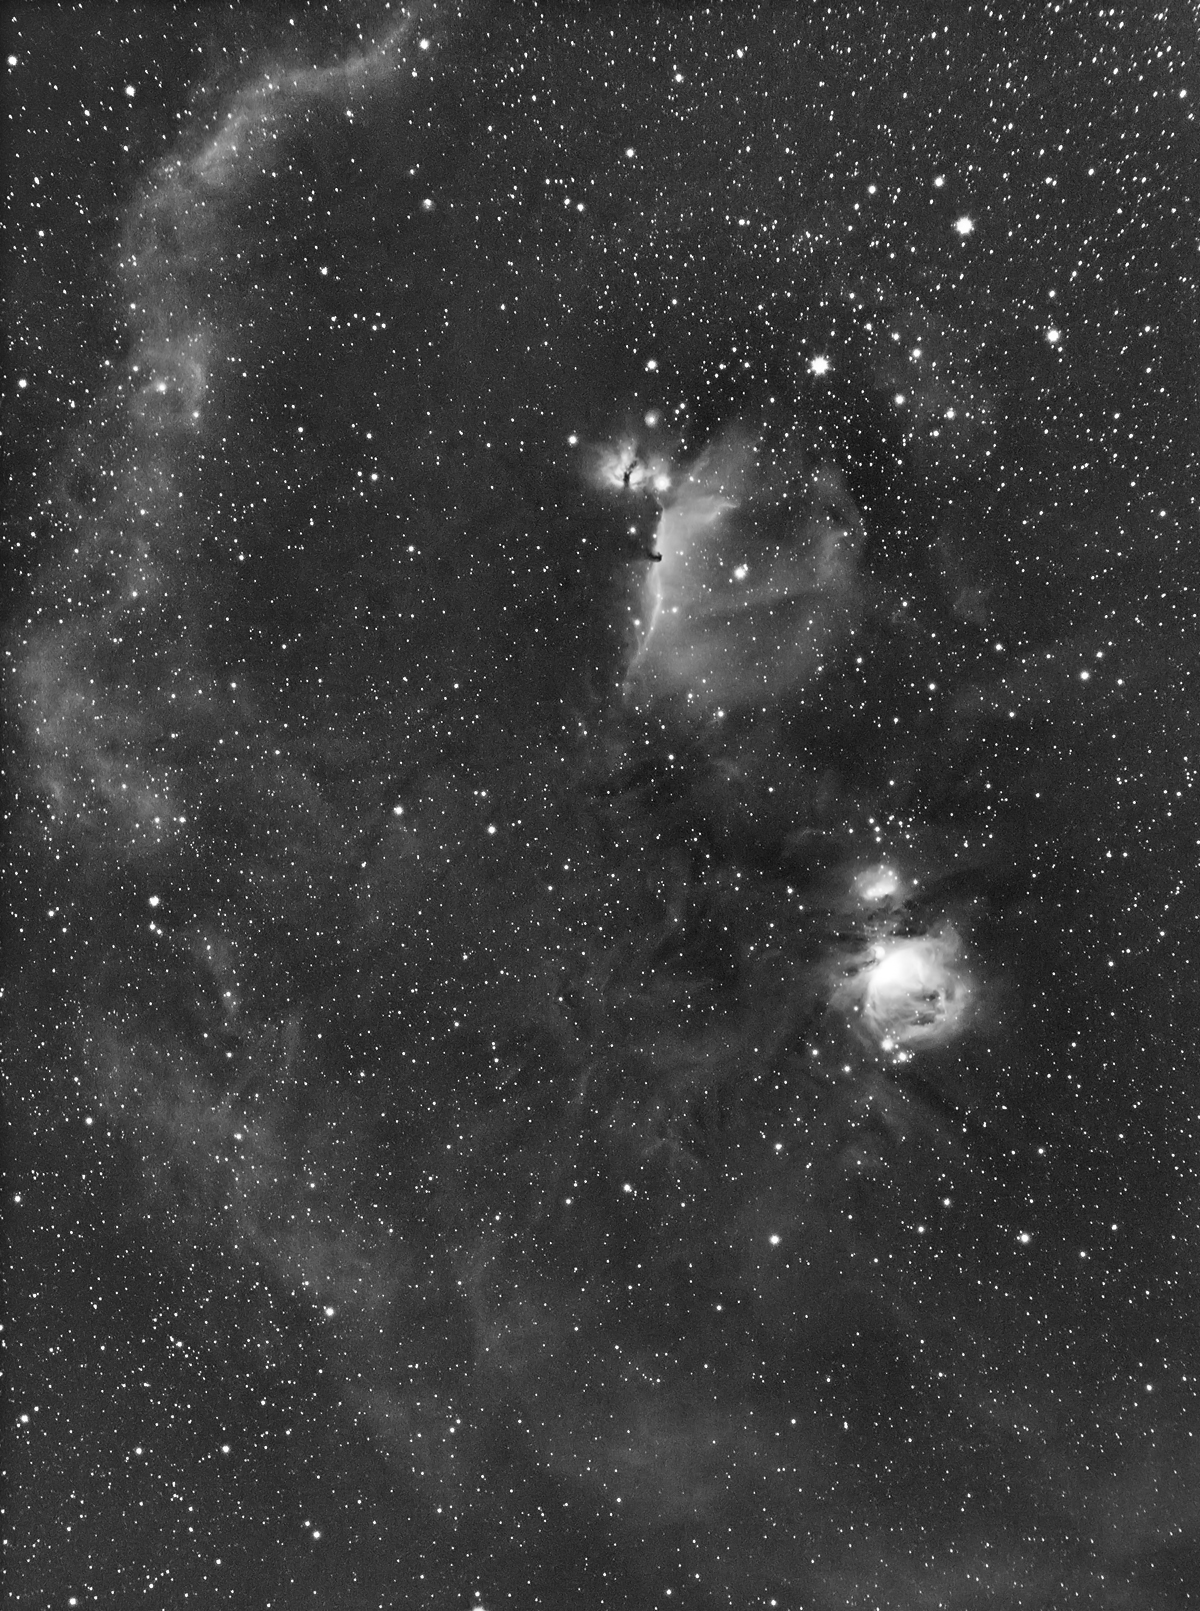 orion_combine_raw_process_rotate_crop_resize1200_reprocess.jpg